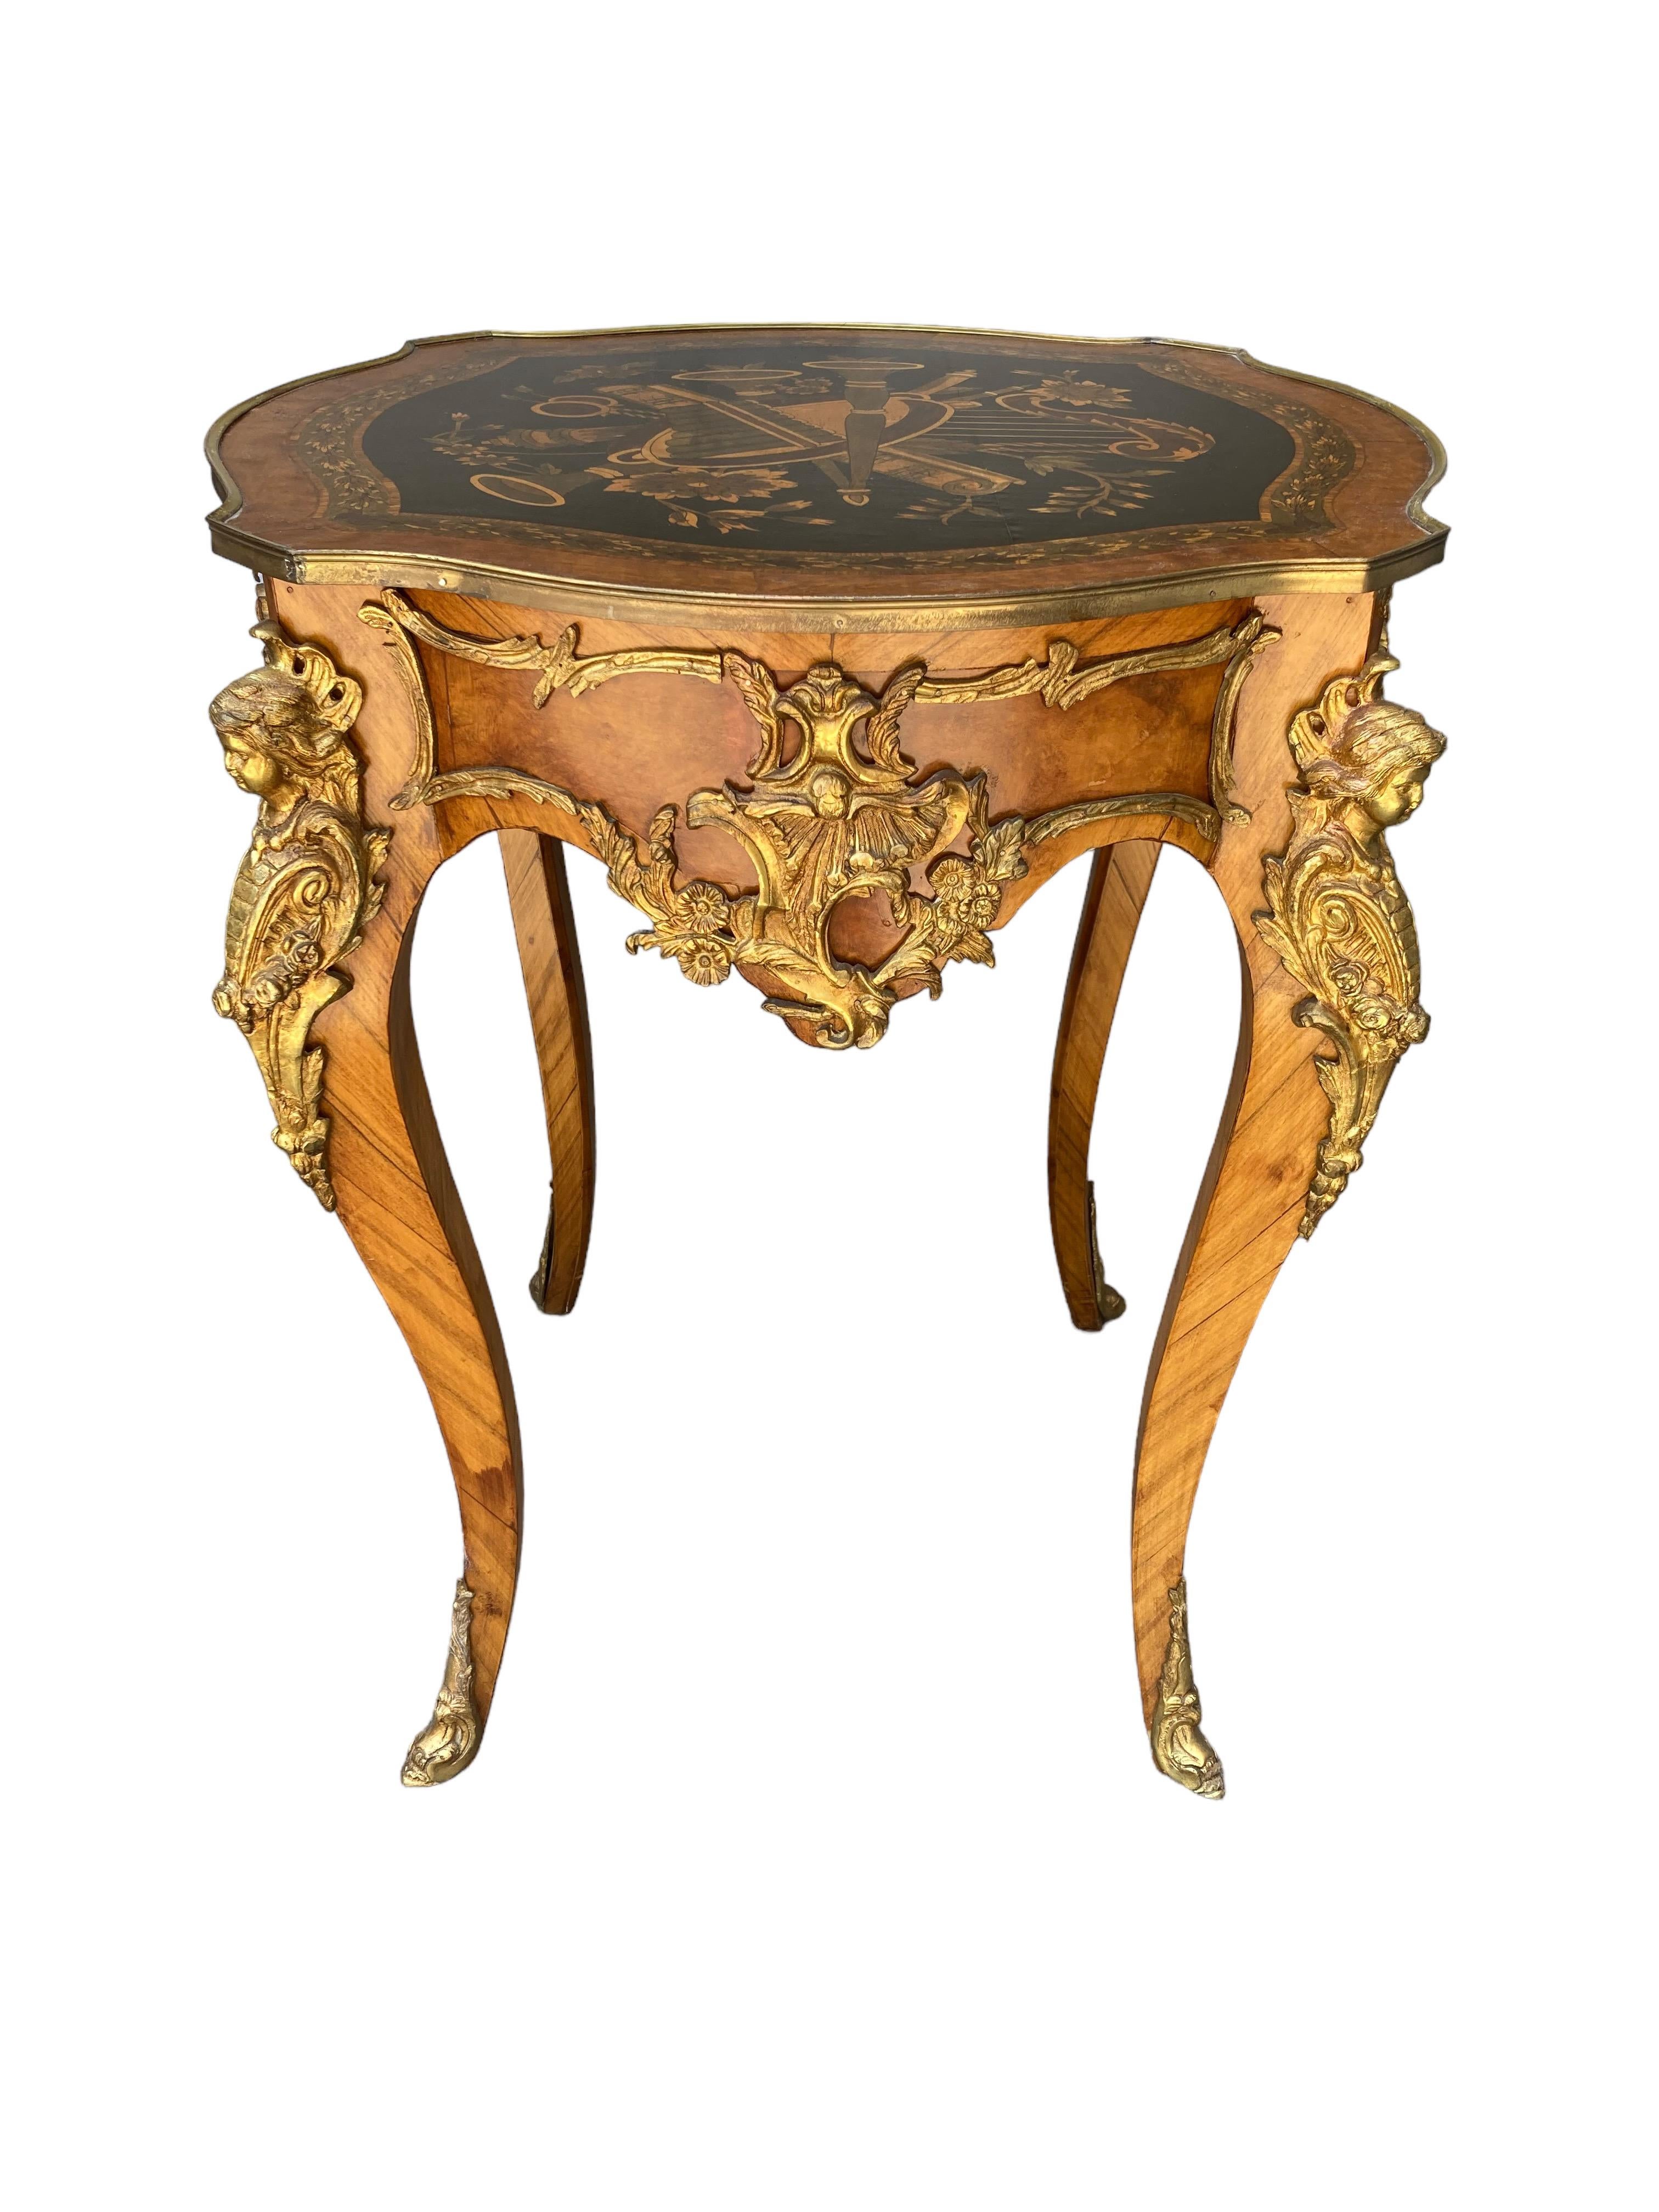 This 1920s Round Hand Painted Ormolu Side Table is a beautiful representation of the French Louis XV Rococo style of furniture. The top of the end table’s art was worked into the detail of the wood and is a musical design. The table measures 31 1/2”